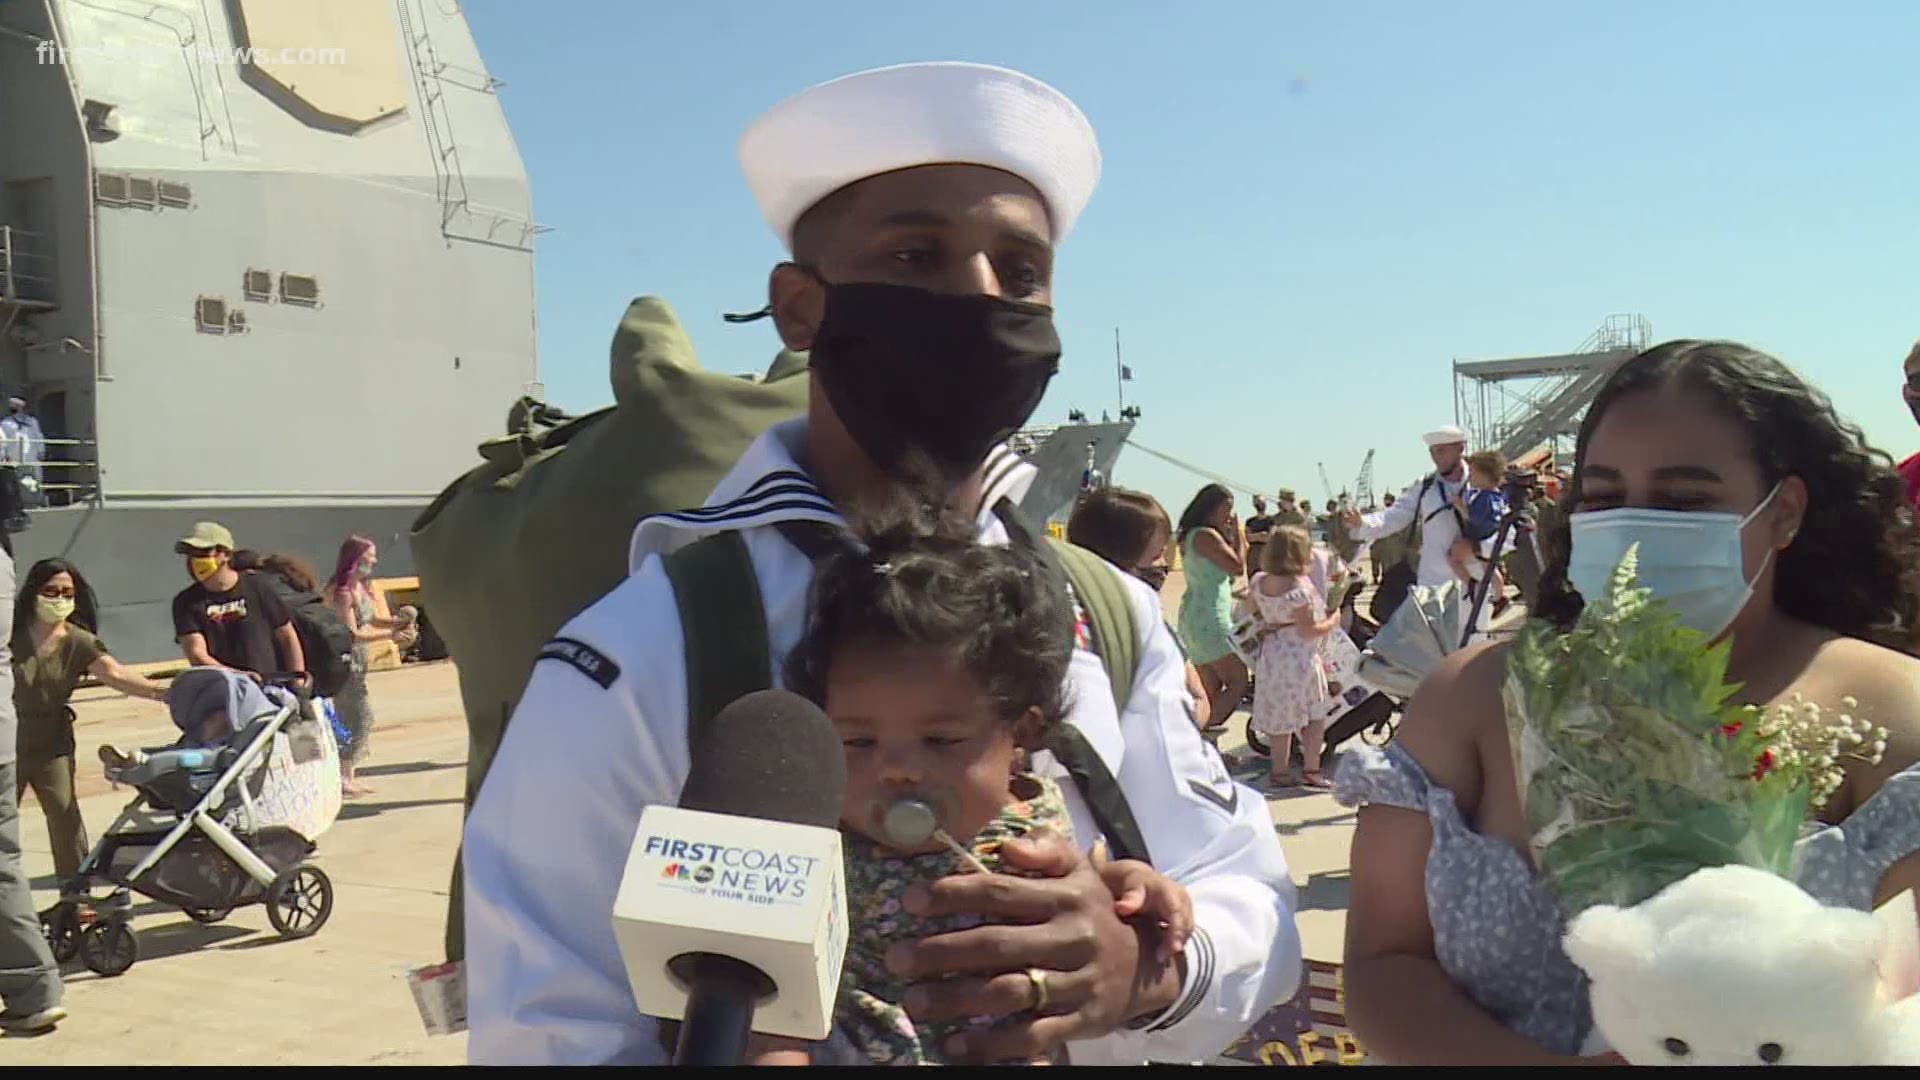 The vessel's homecoming also is a homecoming for the sailors aboard, who have been away from home for 10 months.